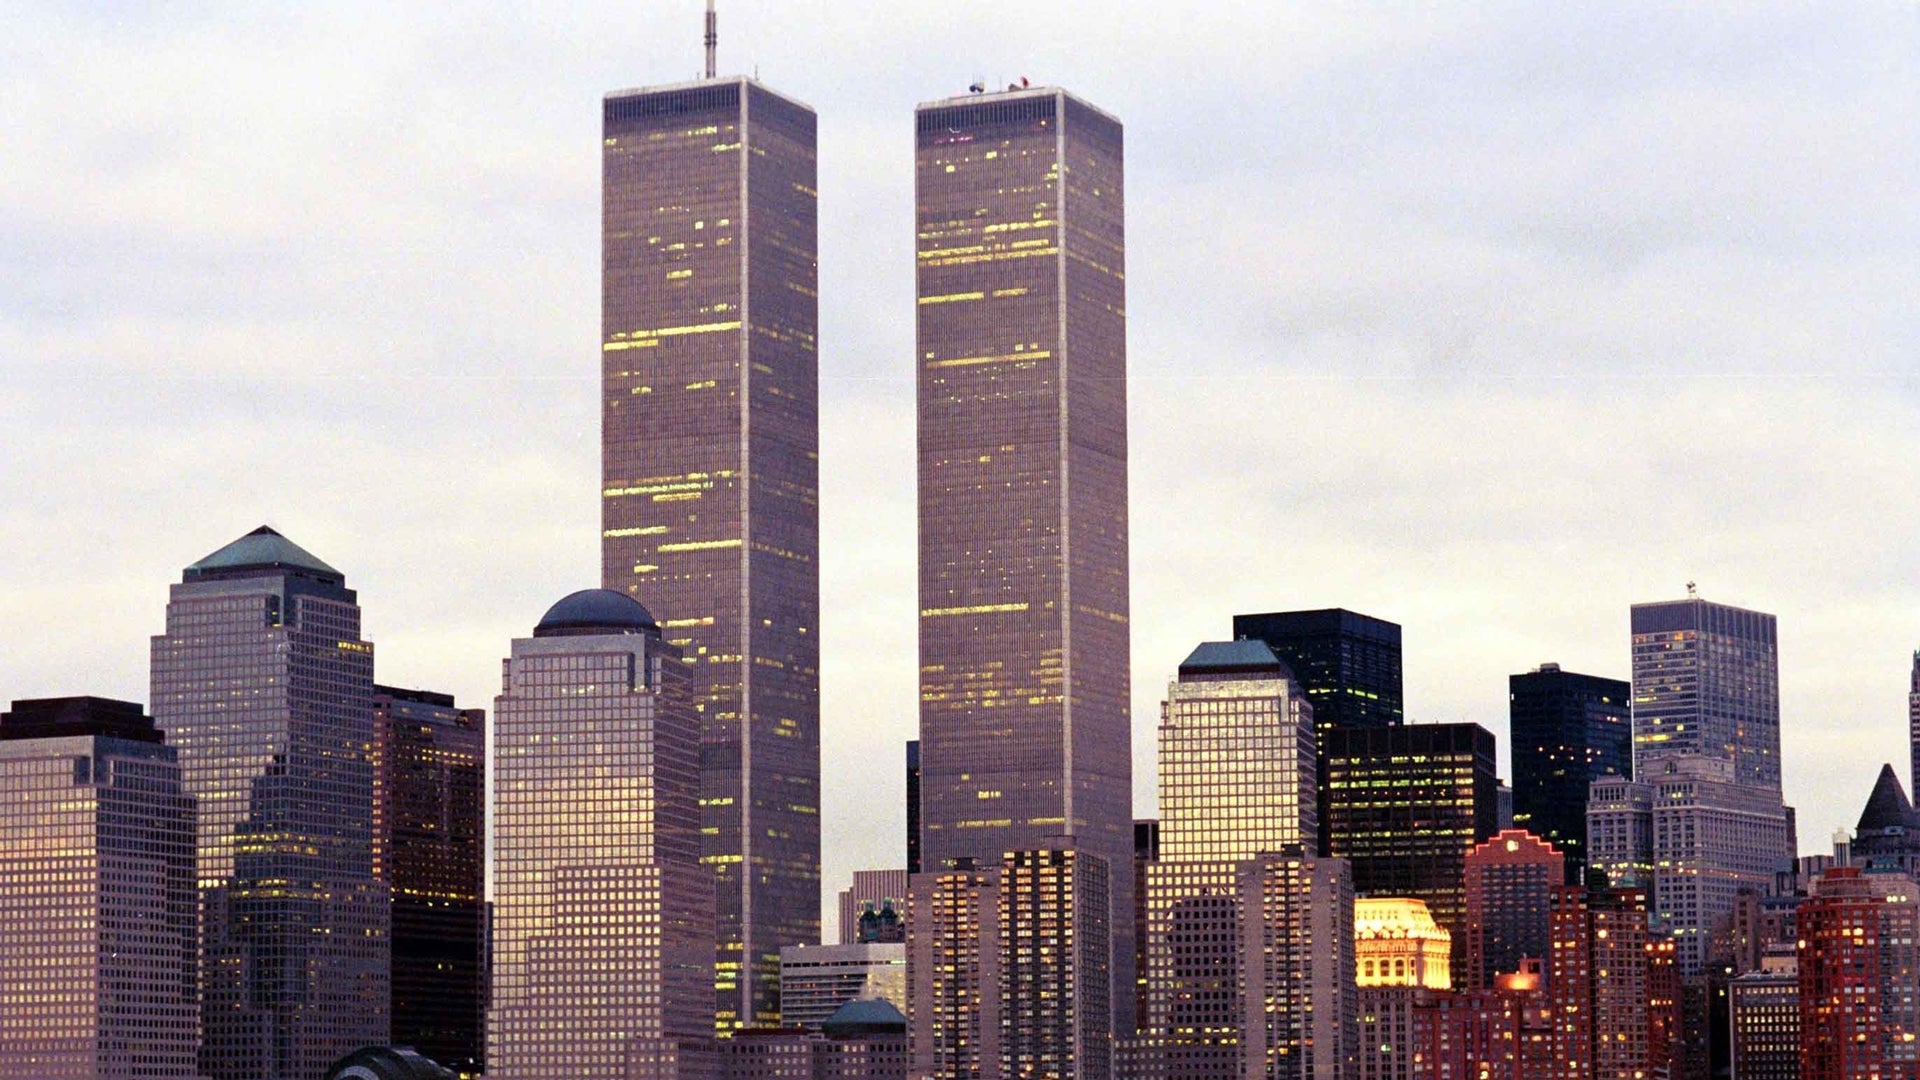 World Trade Center: A Symbol of Global Resilience